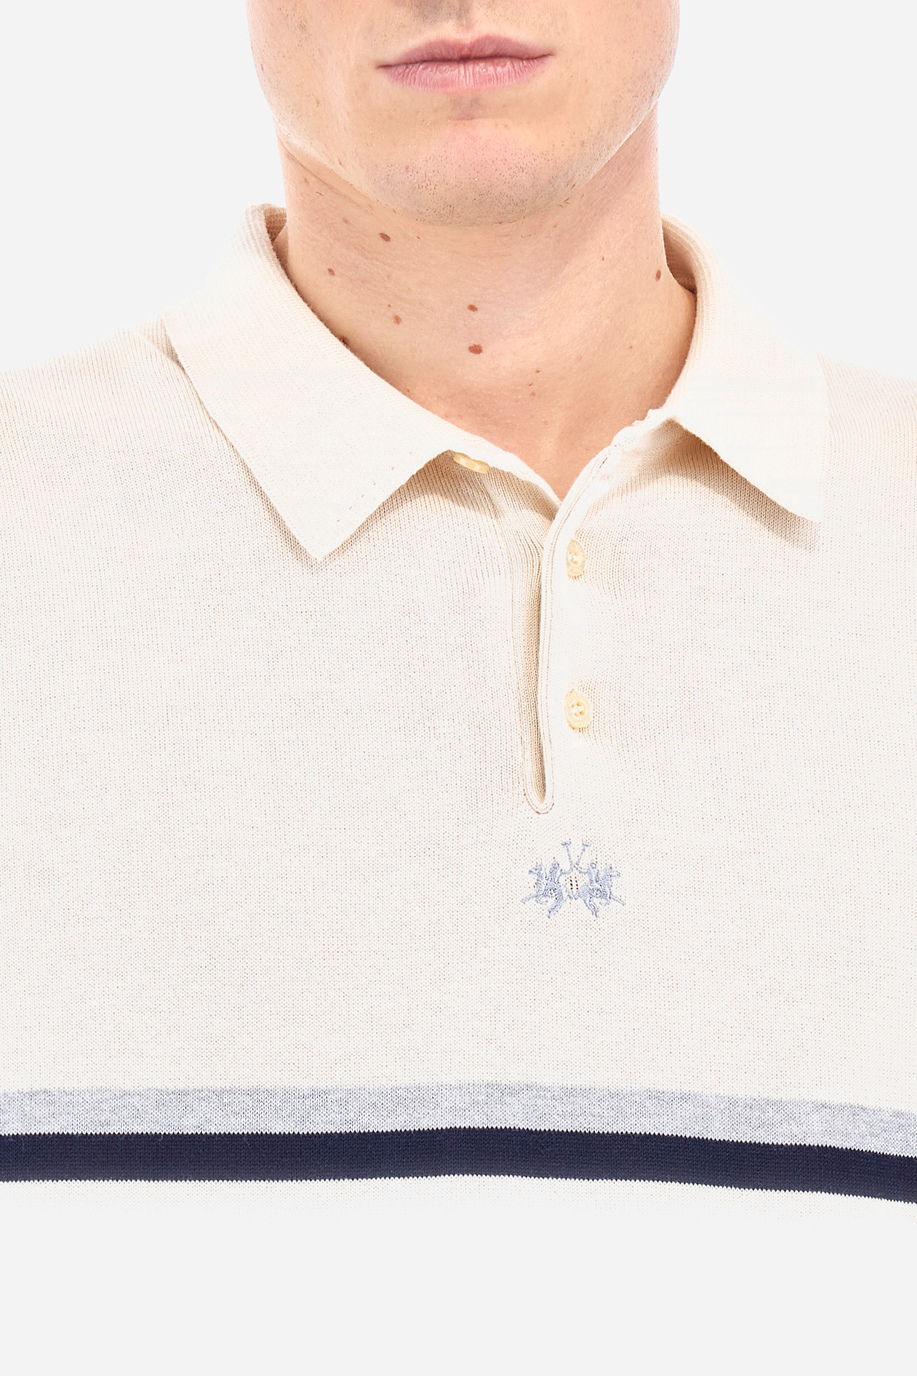 Regular fit men's knitted polo shirt - Yerermia - Polo Academy | La Martina - Official Online Shop